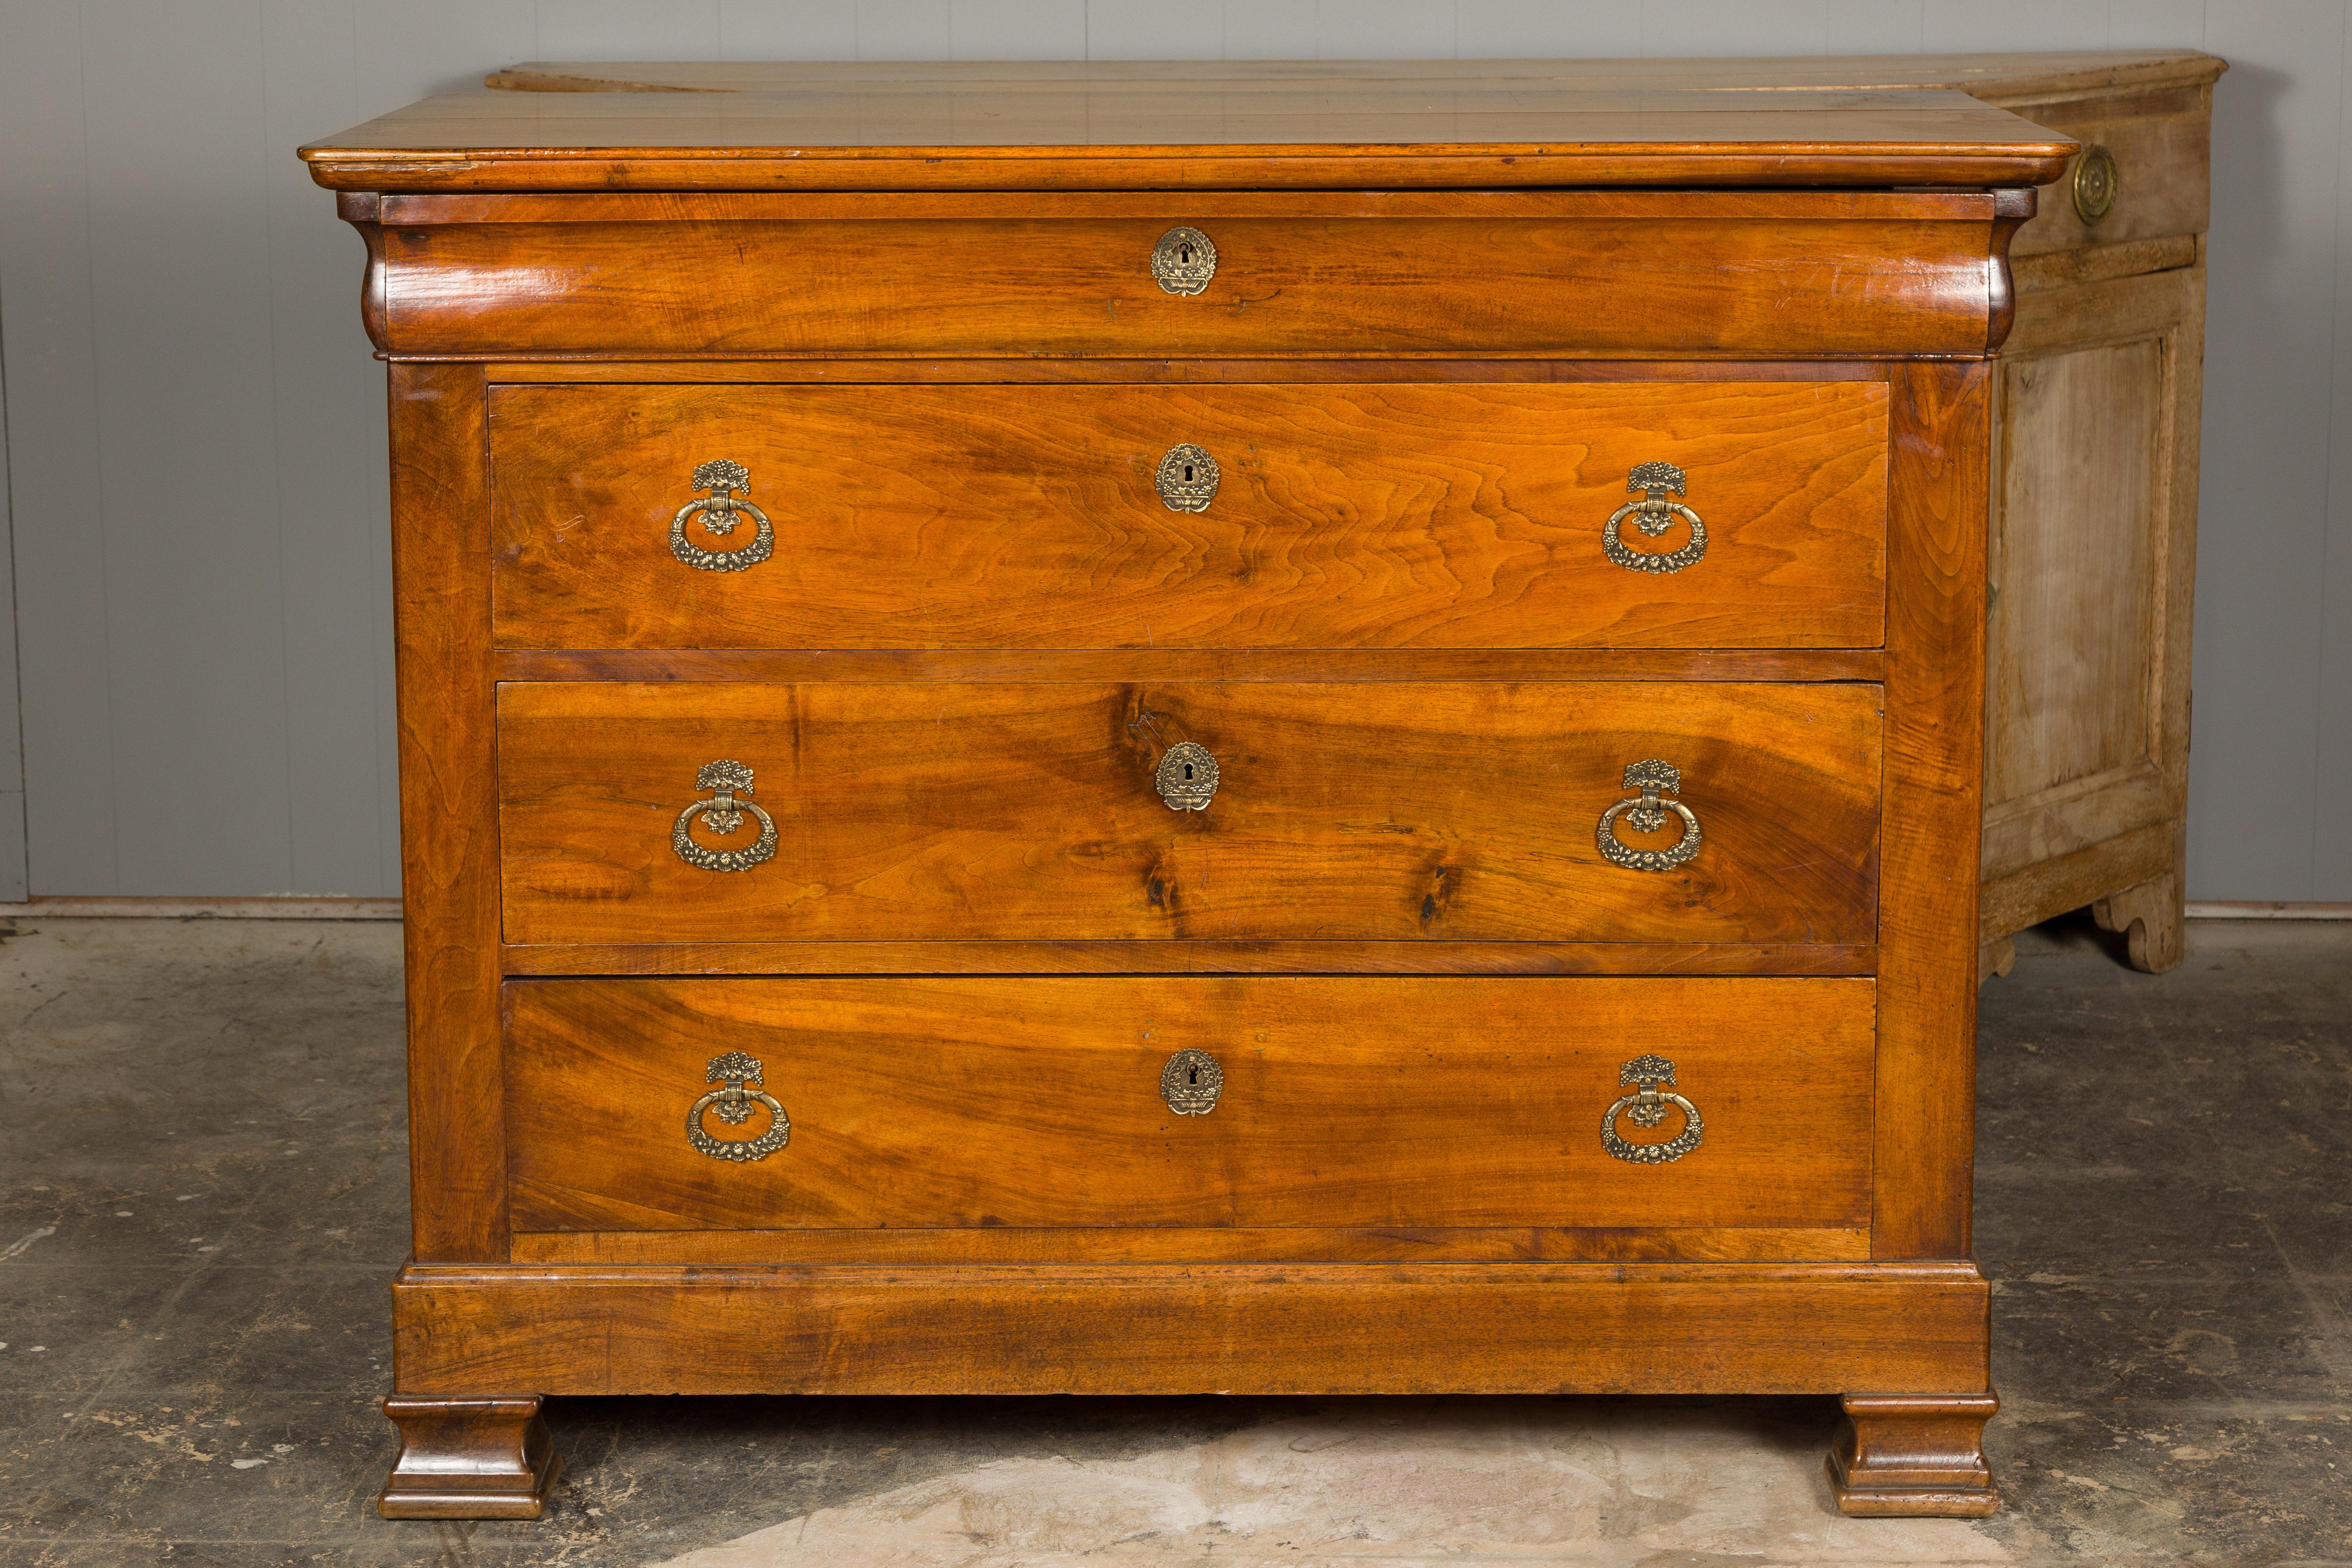 A French Louis Philippe style wooden commode from the 19th century with four drawers, ornate brass hardware and carved feet. Elevate your living space with this exquisite French Louis Philippe style wooden commode from the 19th century. Crafted with